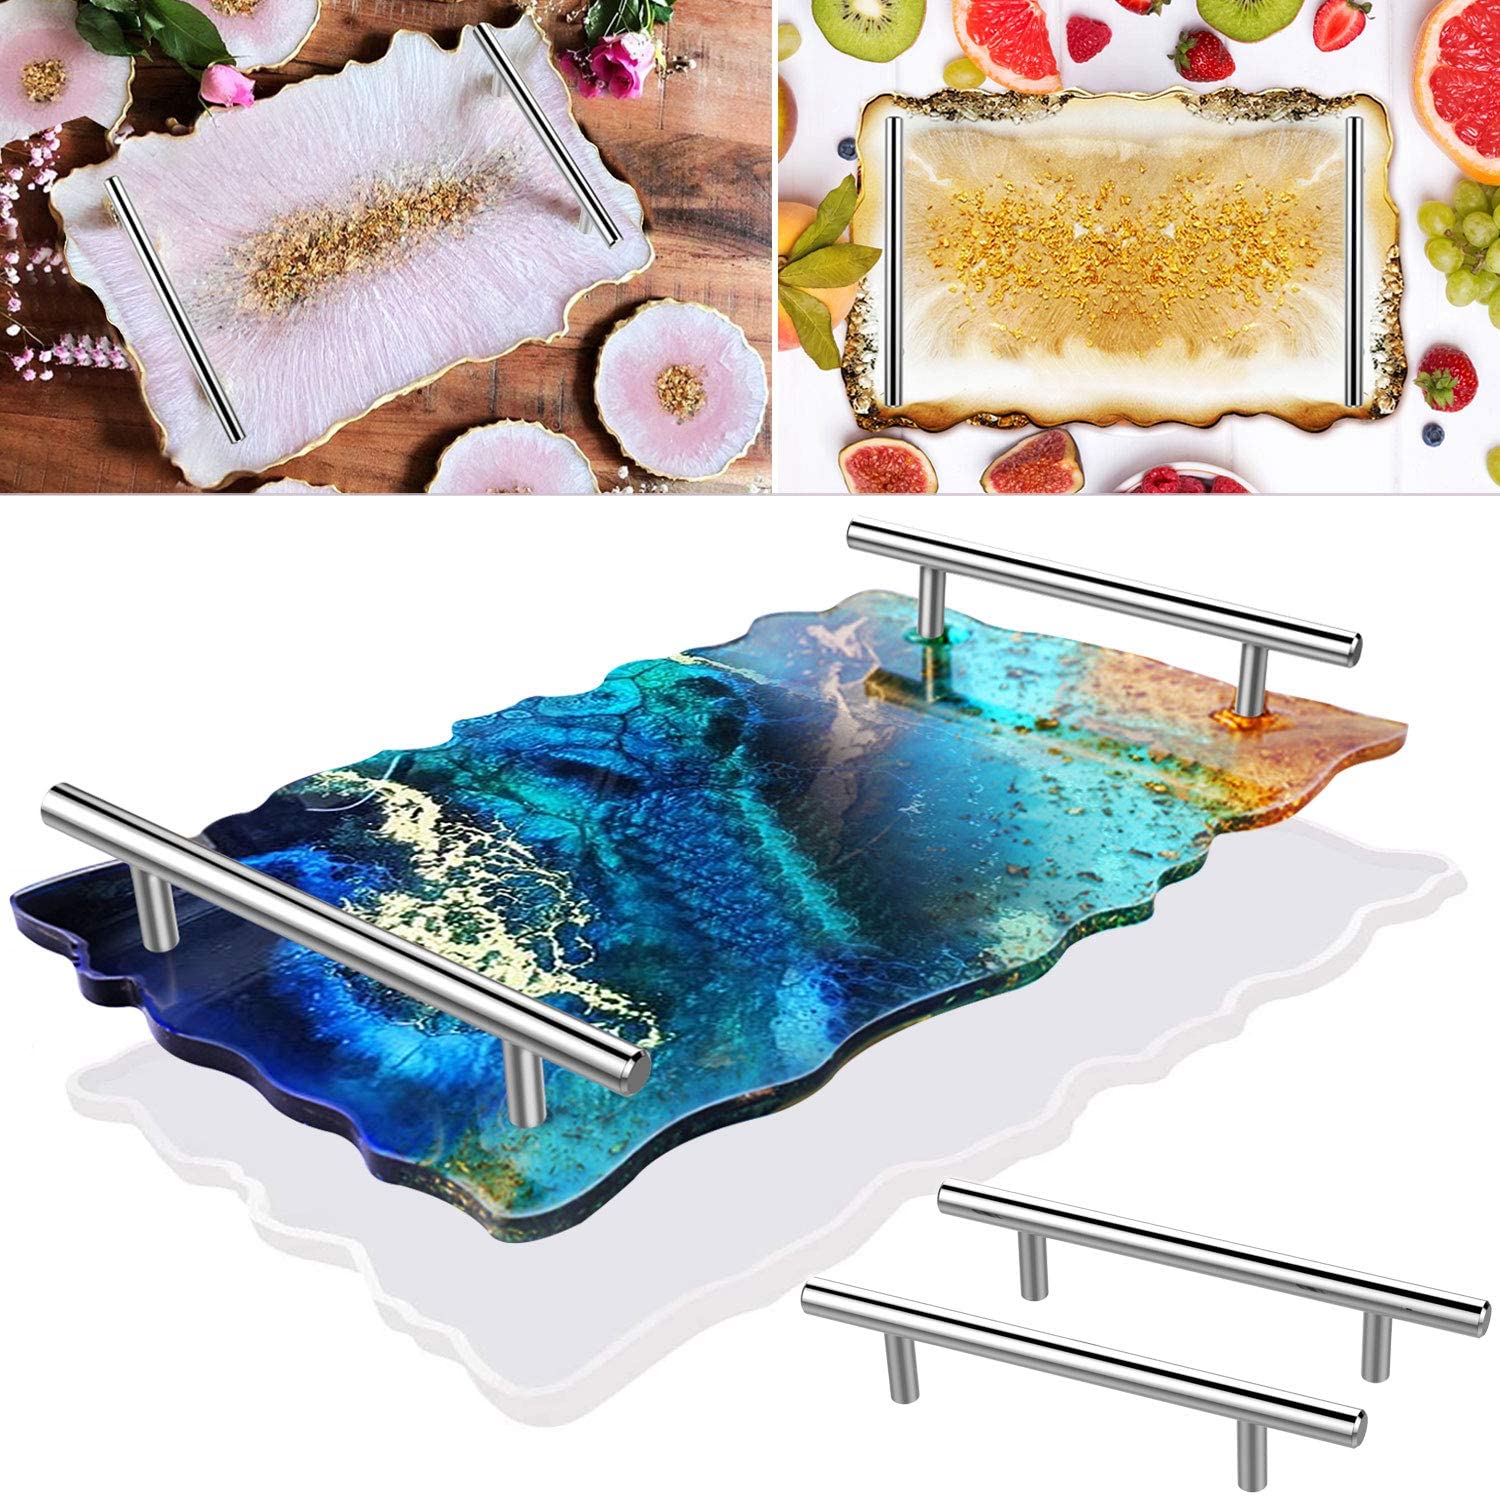 Resin Tray Molds,Geode Agate Platter Molds,Epoxy Resin Casting Molds for Making Faux Agate Tray,Serving Board